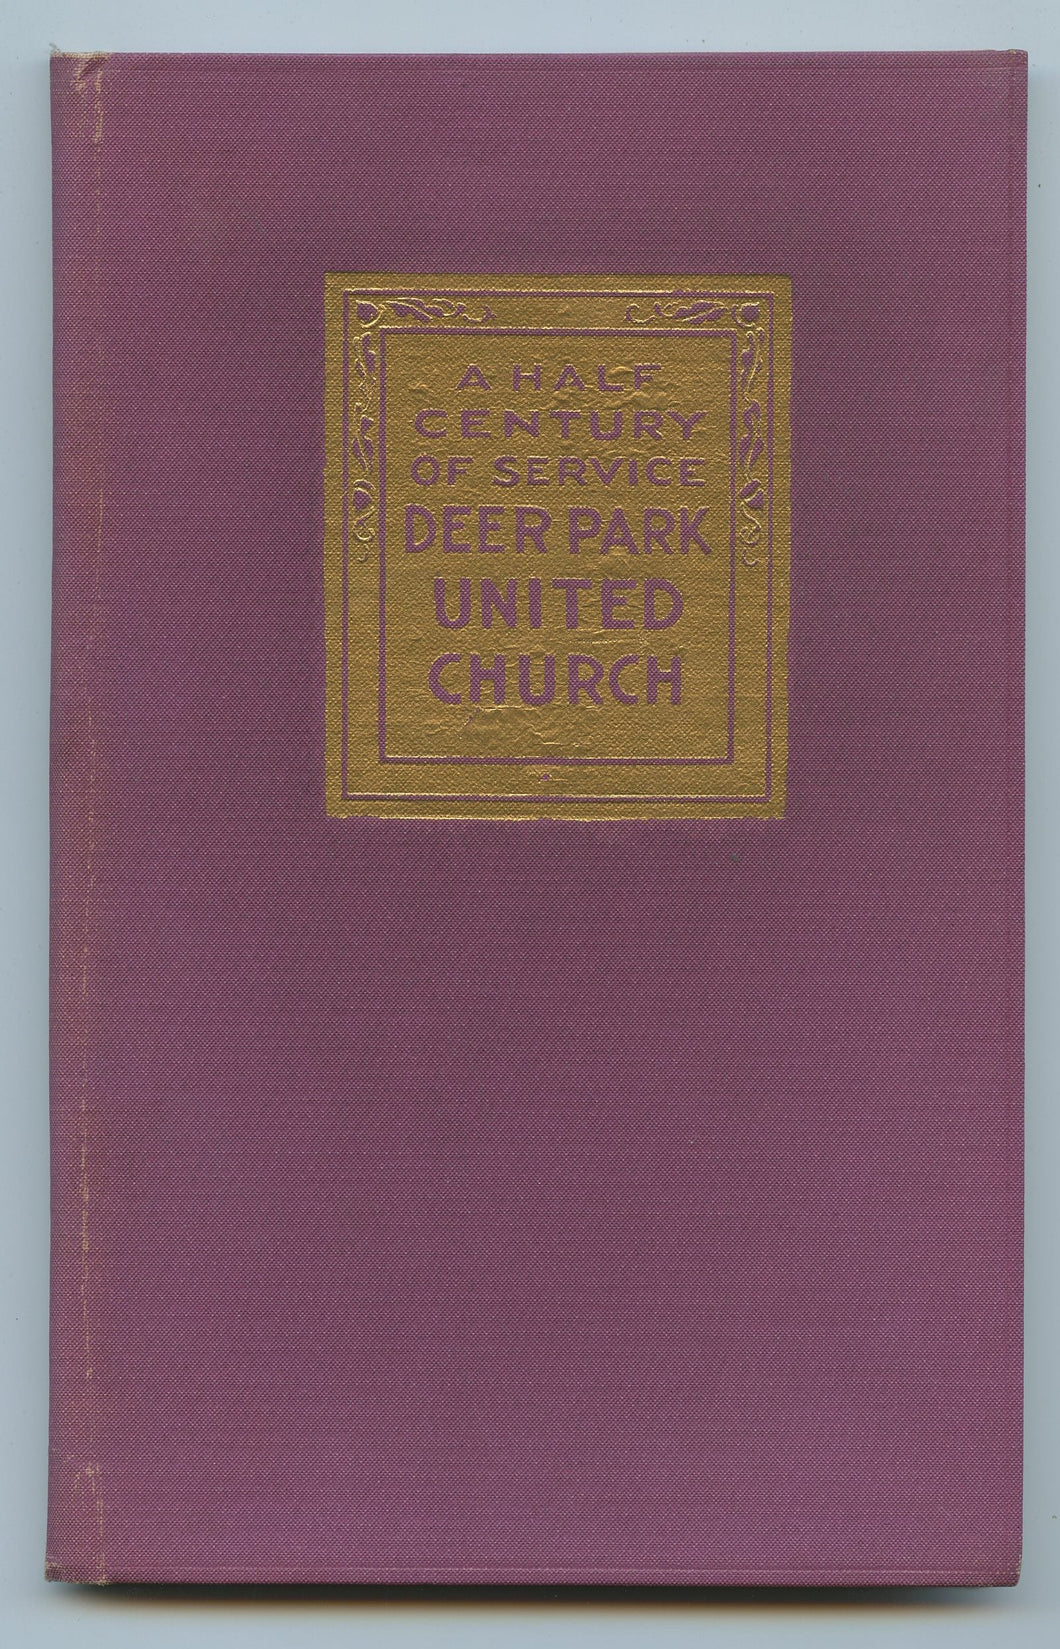 A Half Century of Service: Being the Story of Deer Park United Church